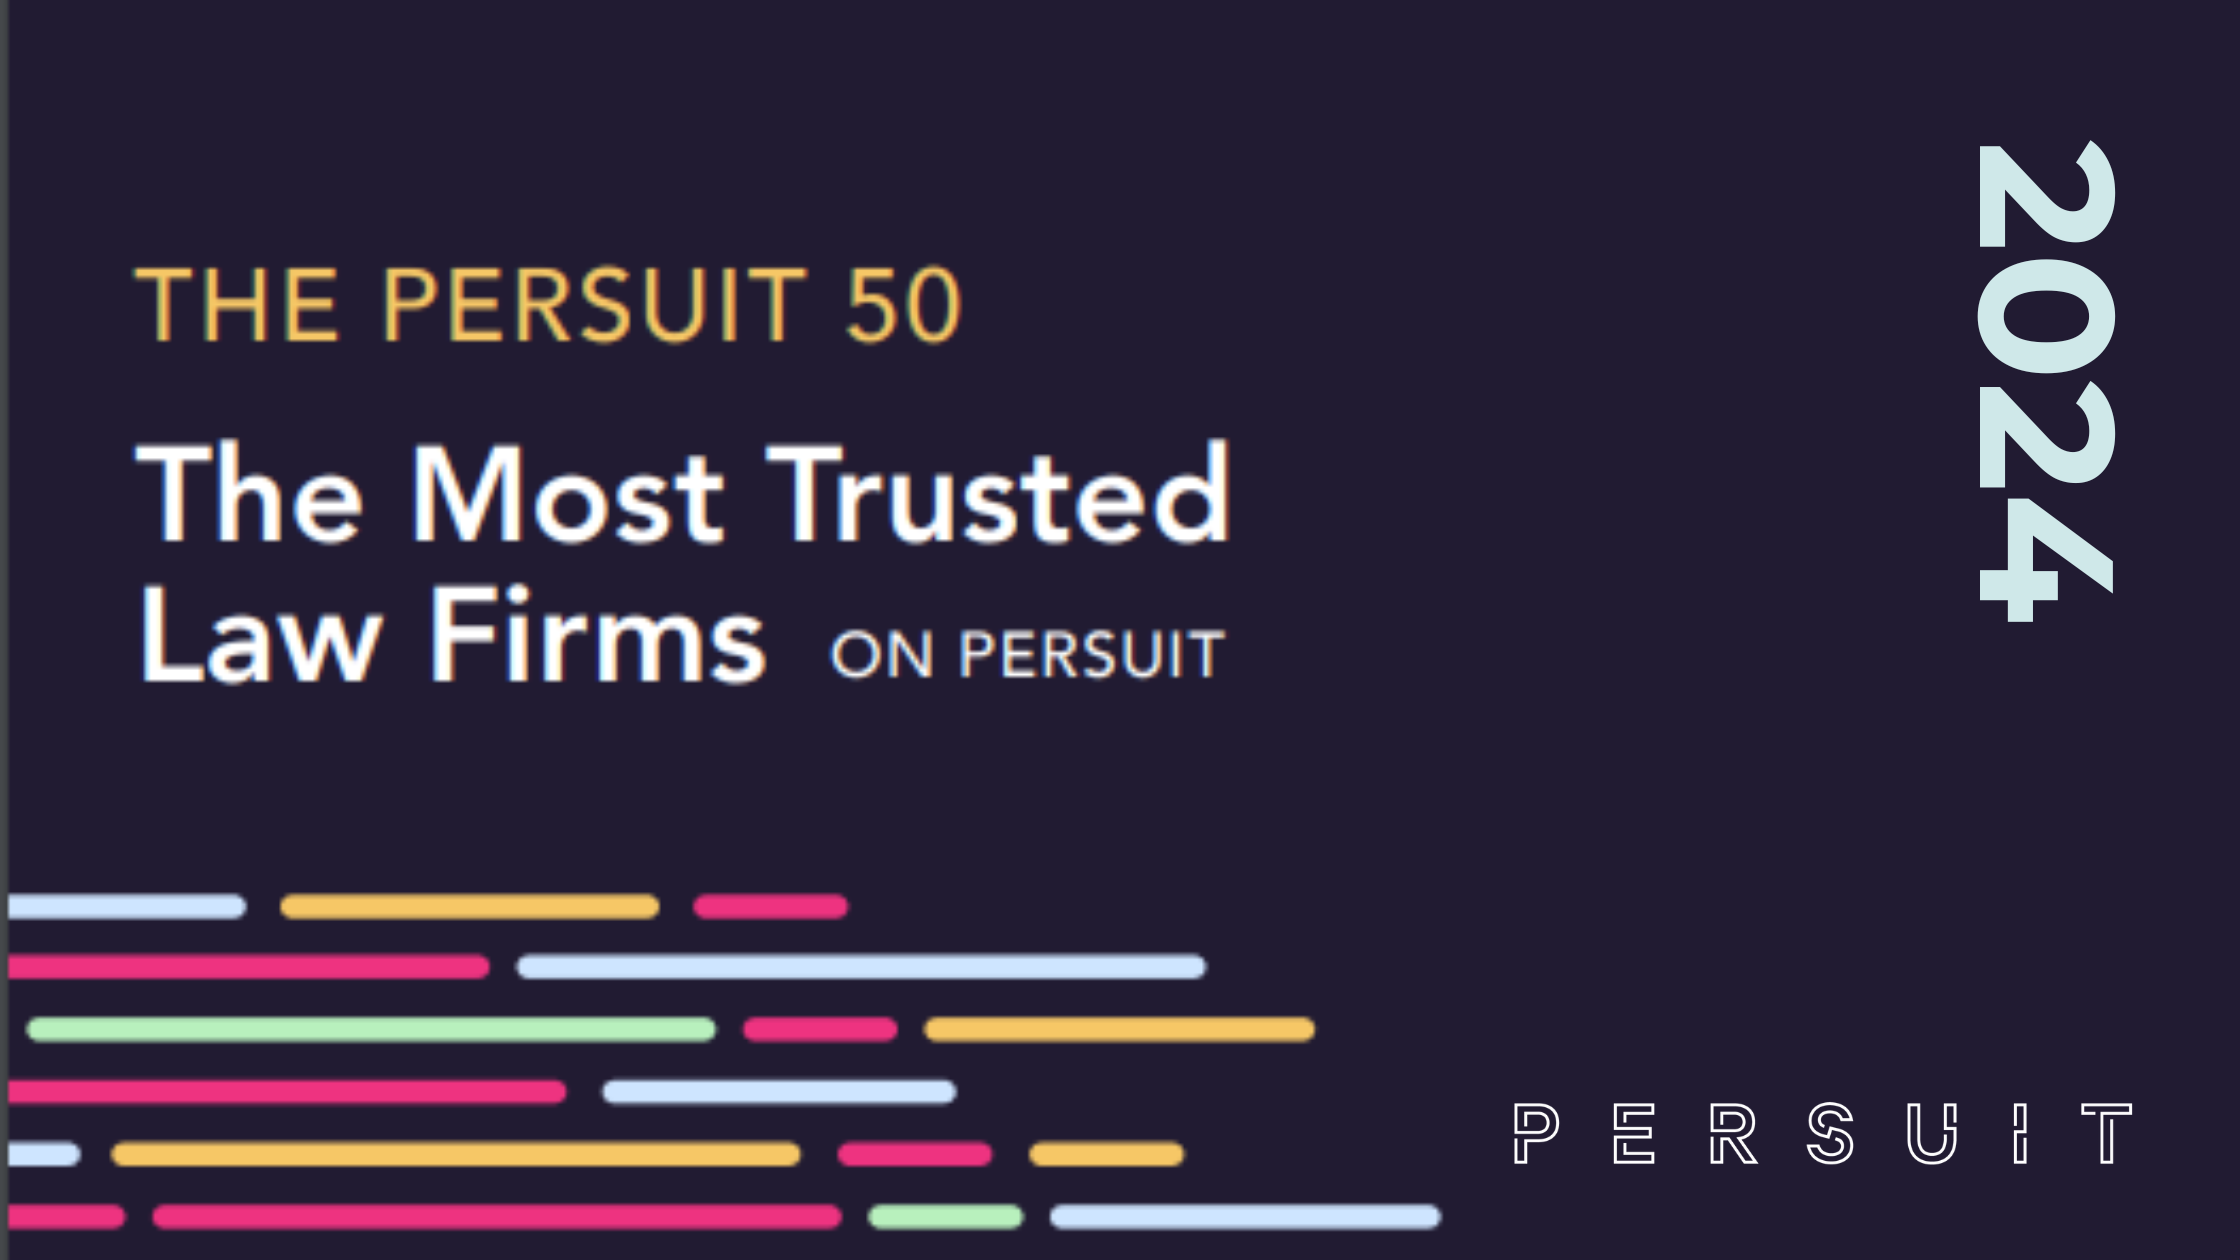 PERSUIT Blog Post Graphics Template (2240 x 1260 px) (11)-3